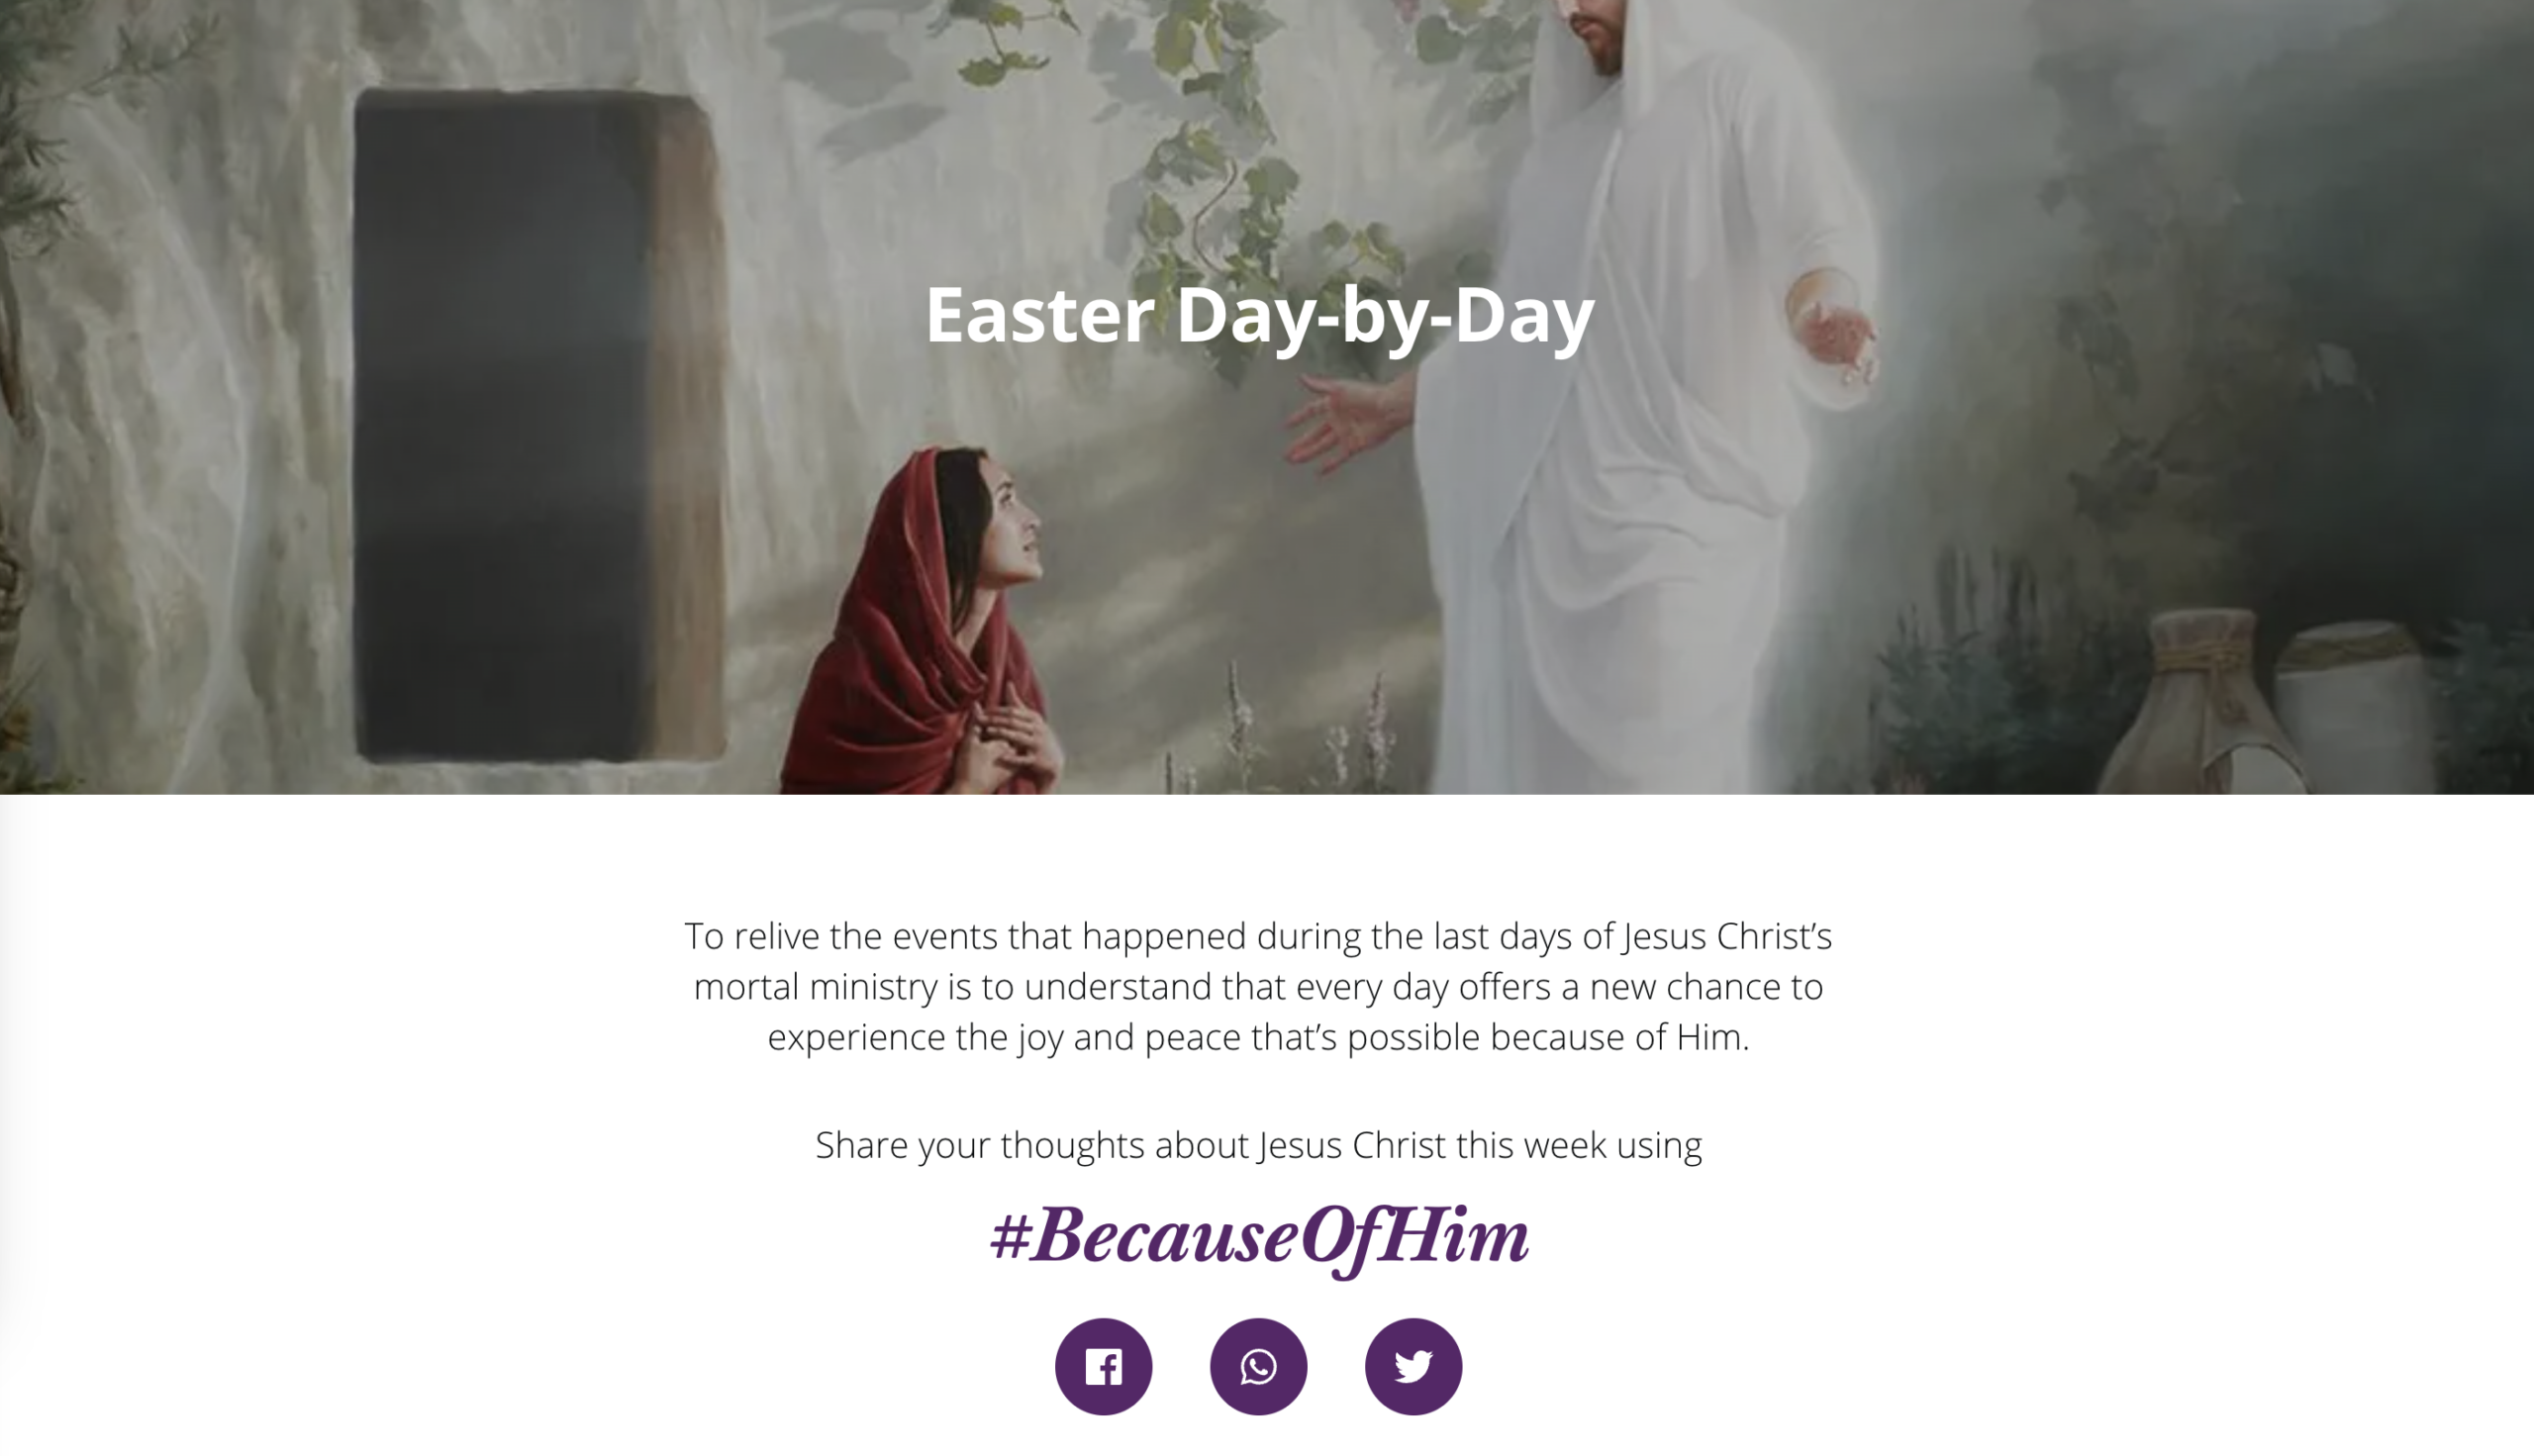 screenshot of the church "Easter day-by-day guide"